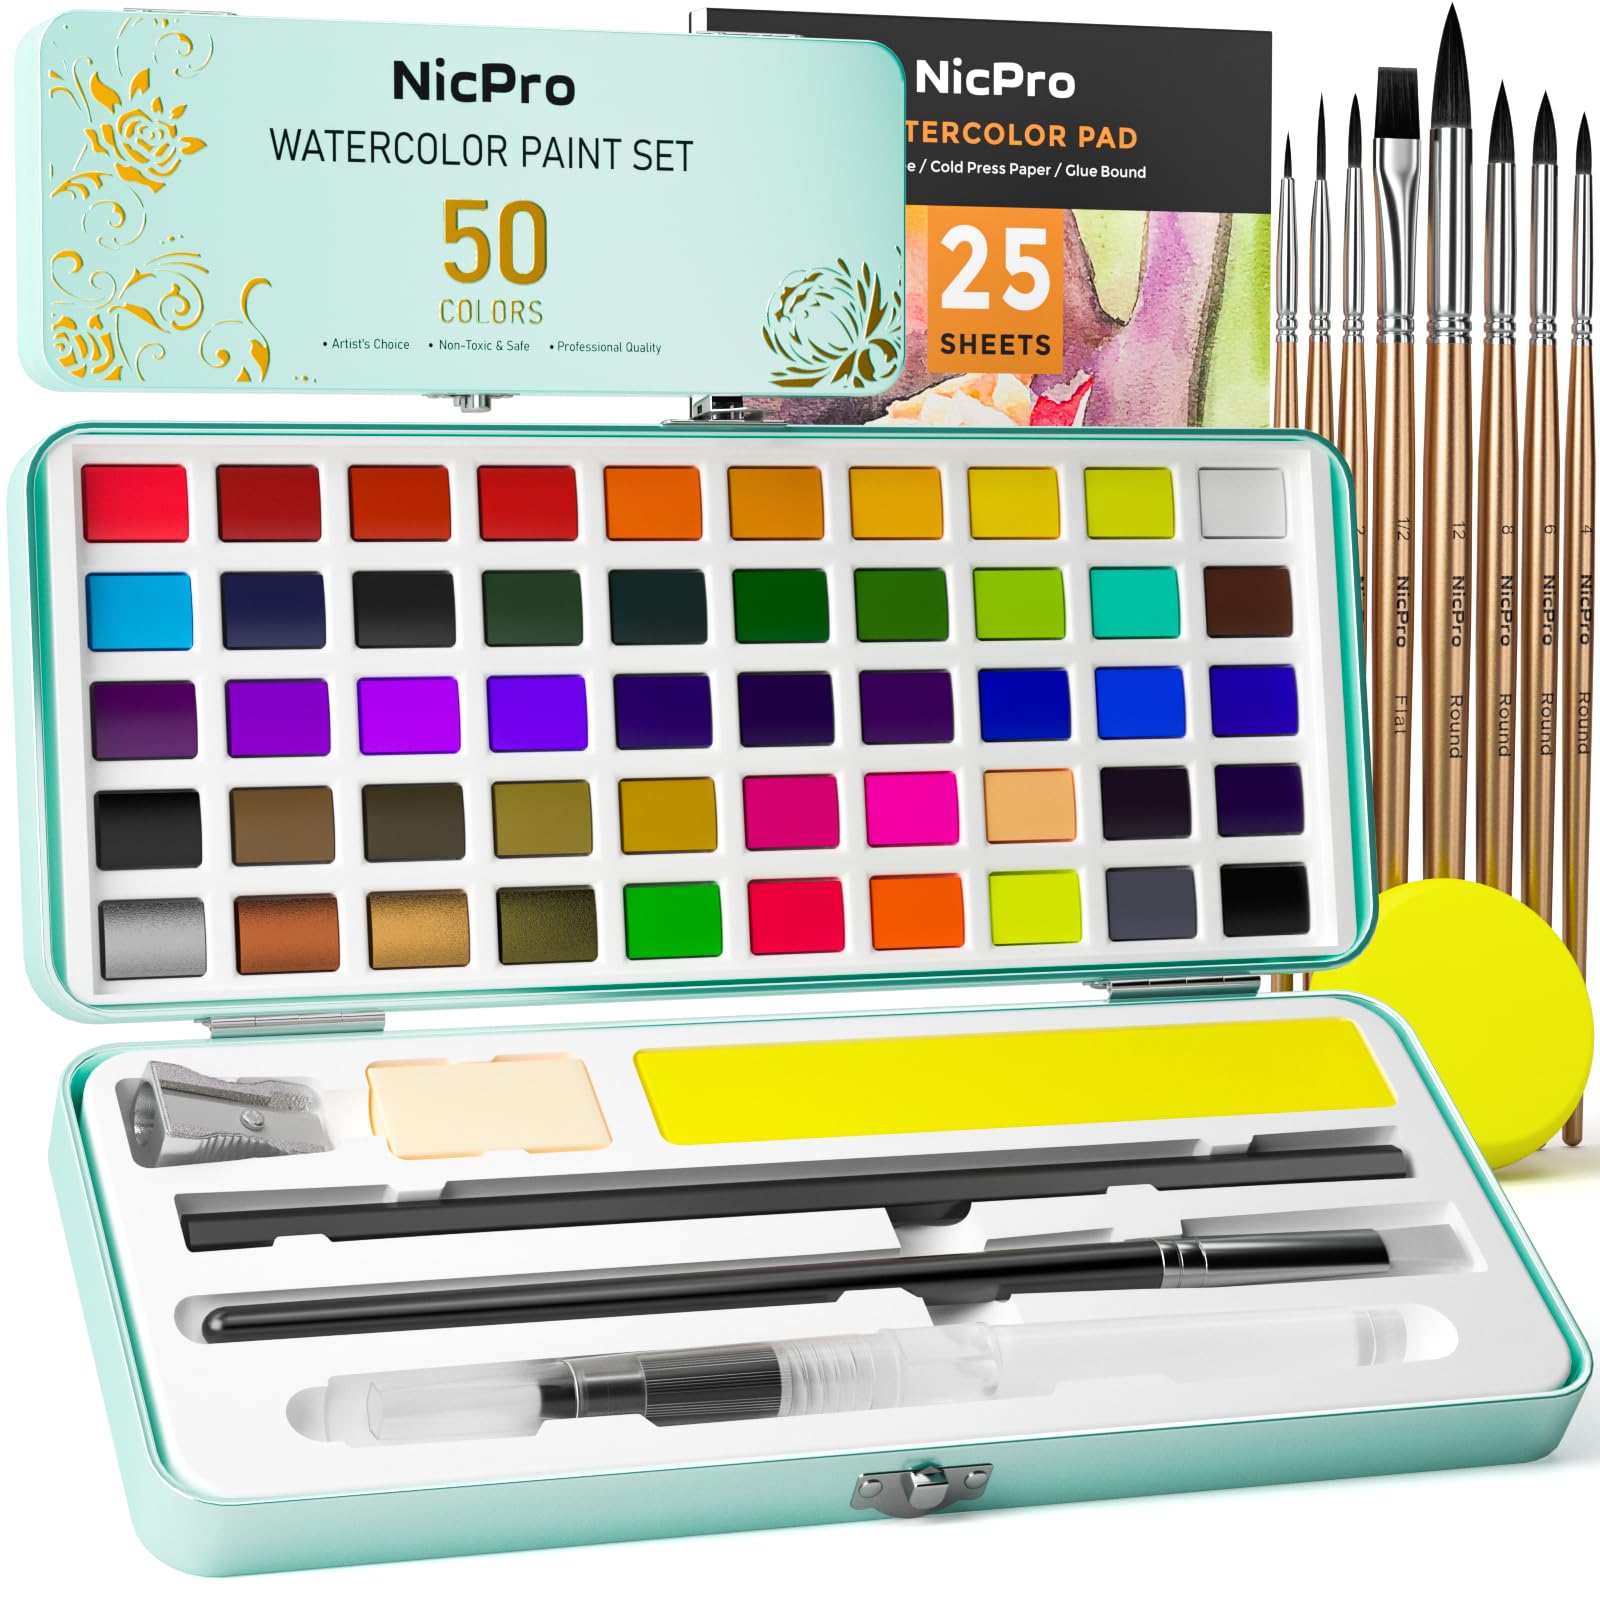 Paint Set 50 Travel Watercolor Palette with Paper, Brush, Pen & more NEW